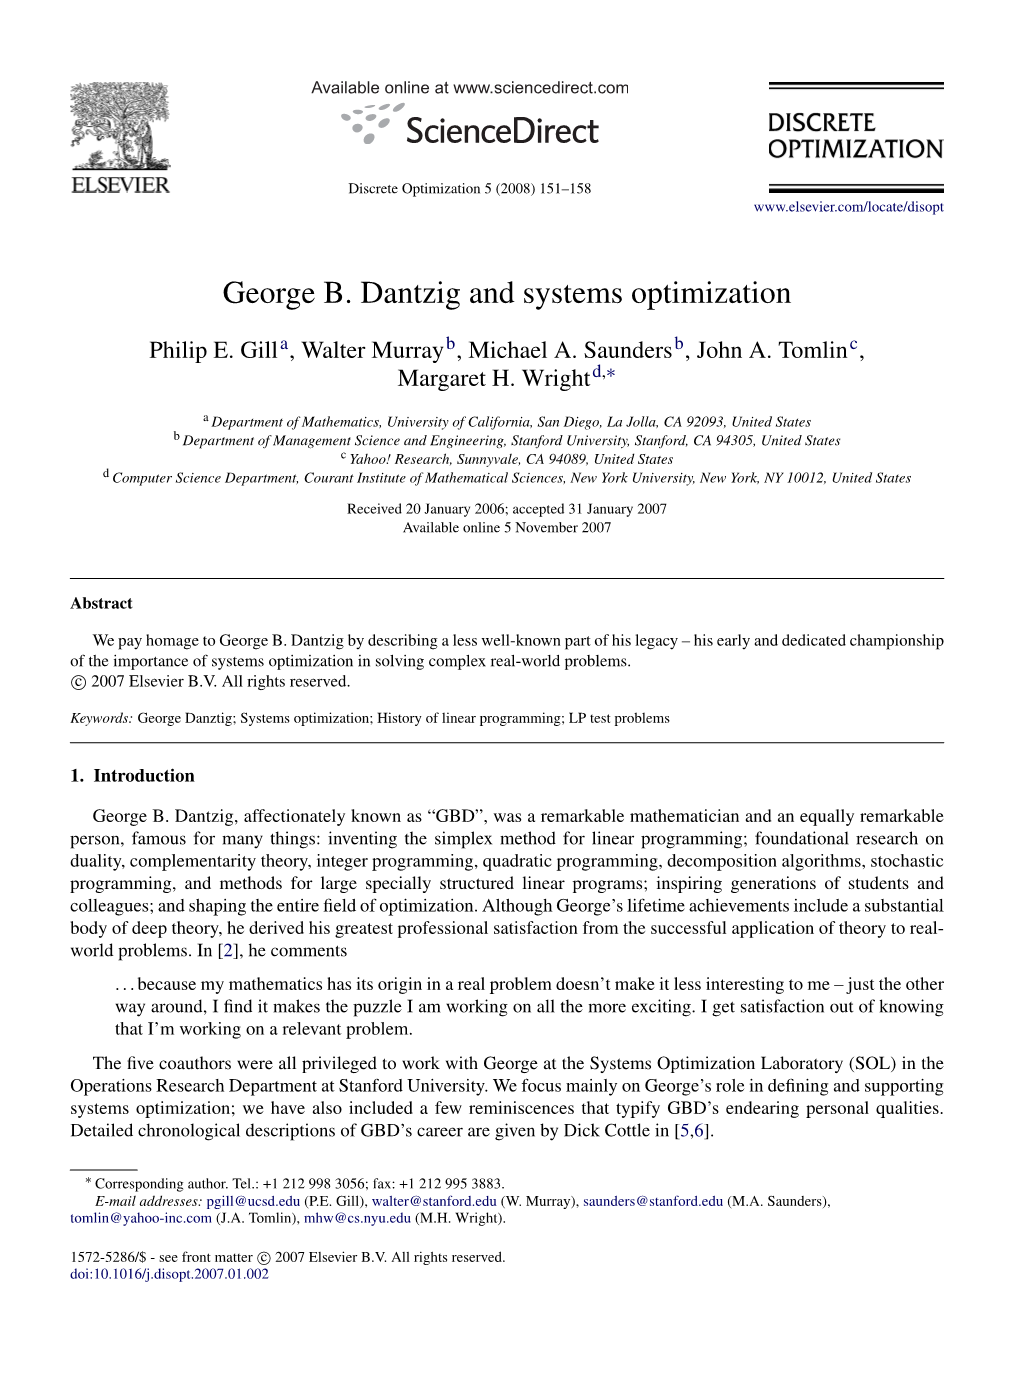 George B. Dantzig and Systems Optimization